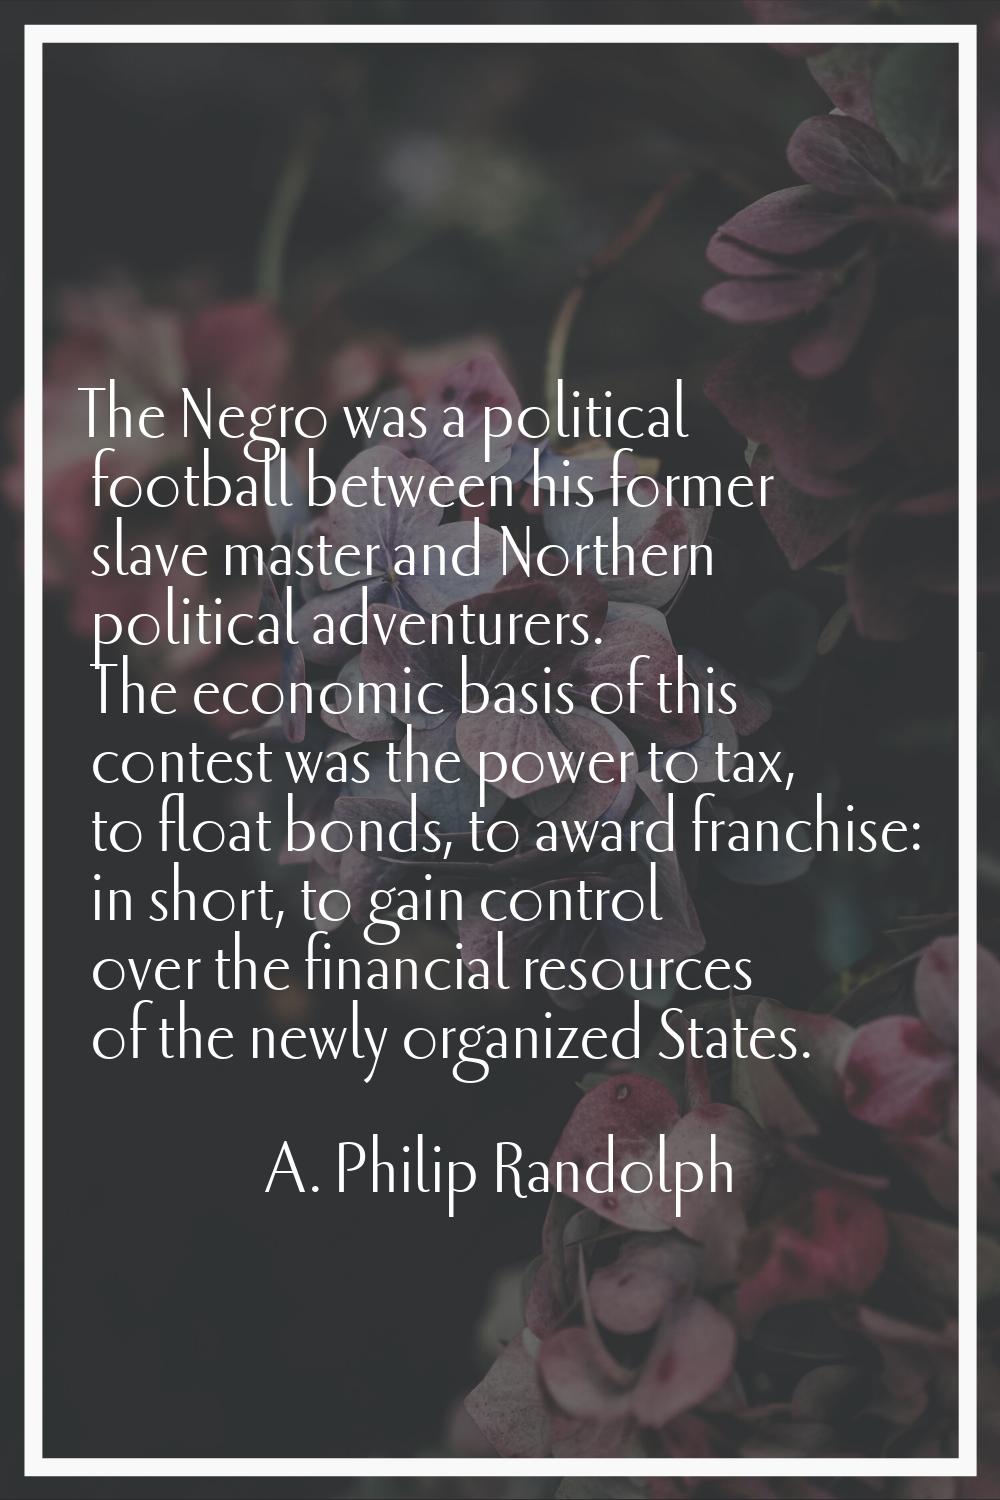 The Negro was a political football between his former slave master and Northern political adventure